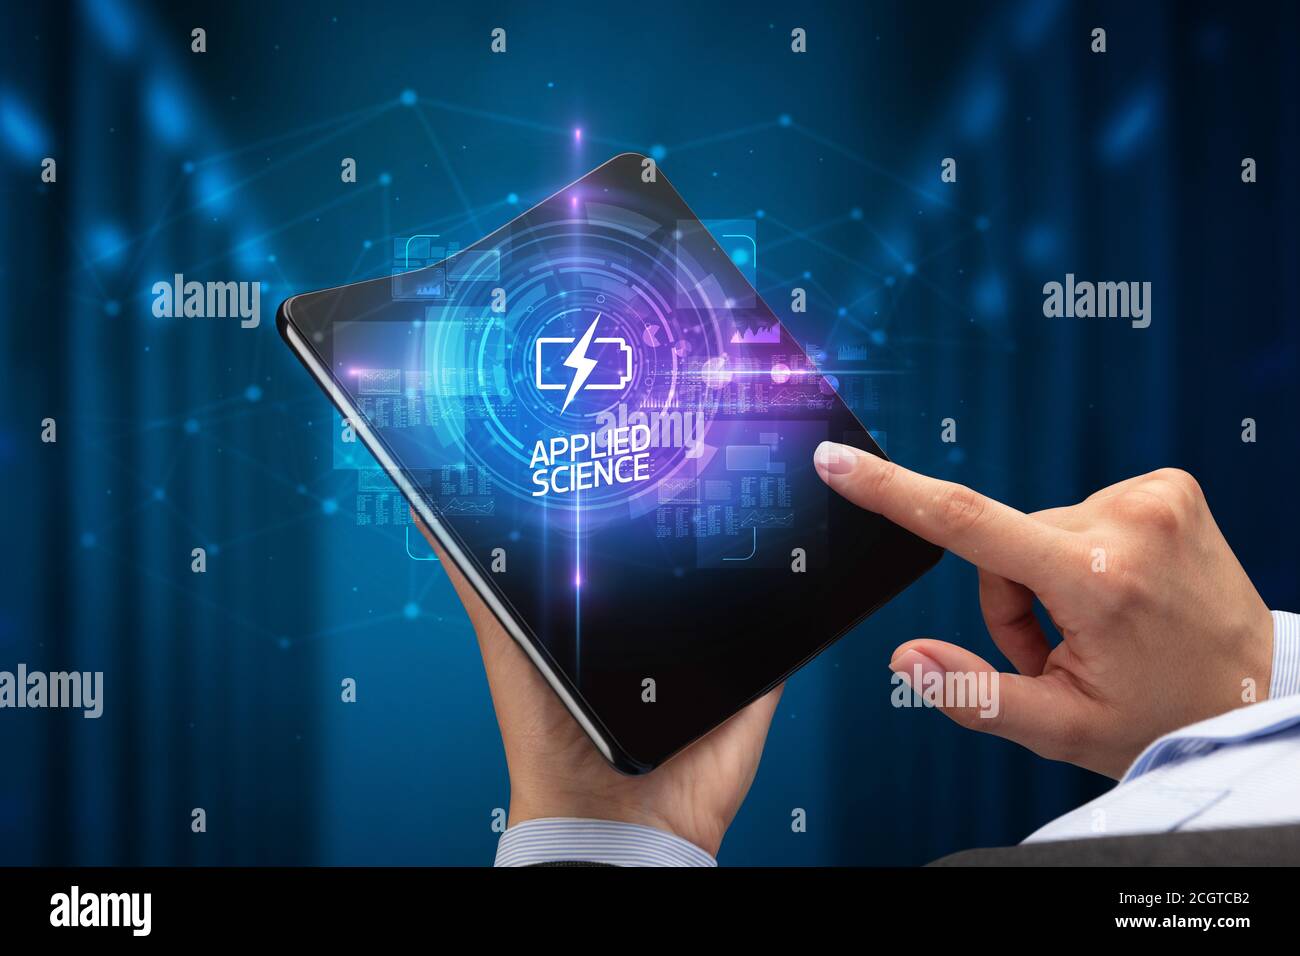 Businessman holding a foldable smartphone with INTERNET inscription, new technology concept APPLIED SCIENCE Stock Photo